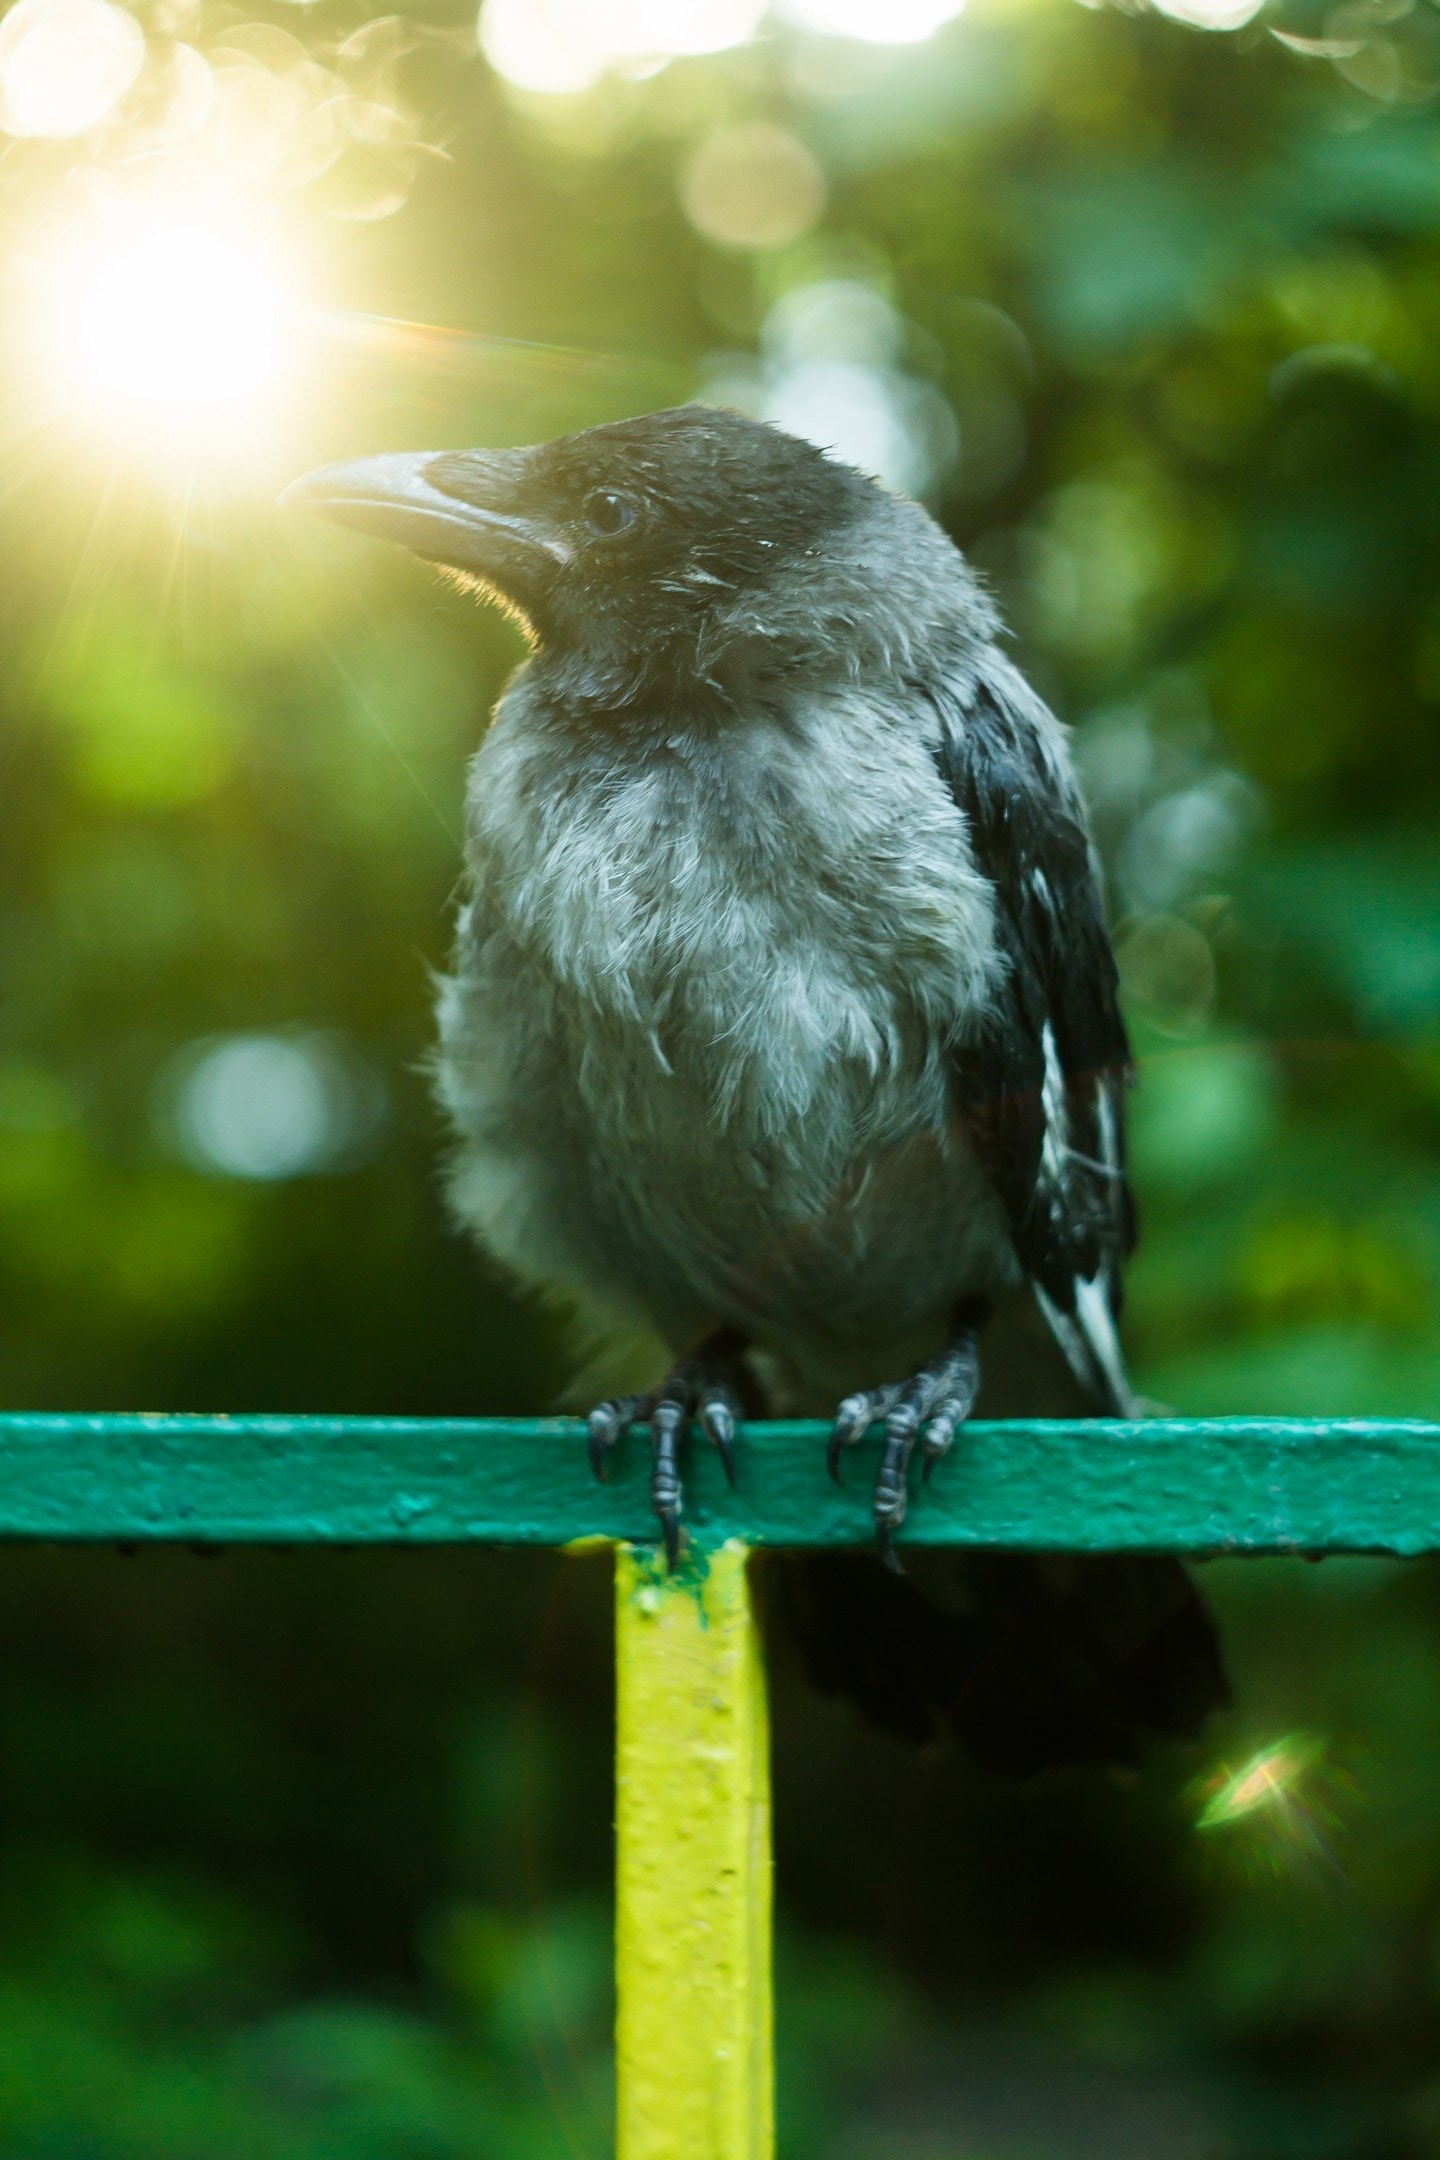 photo of gray and black bird standing in green and yellow fence